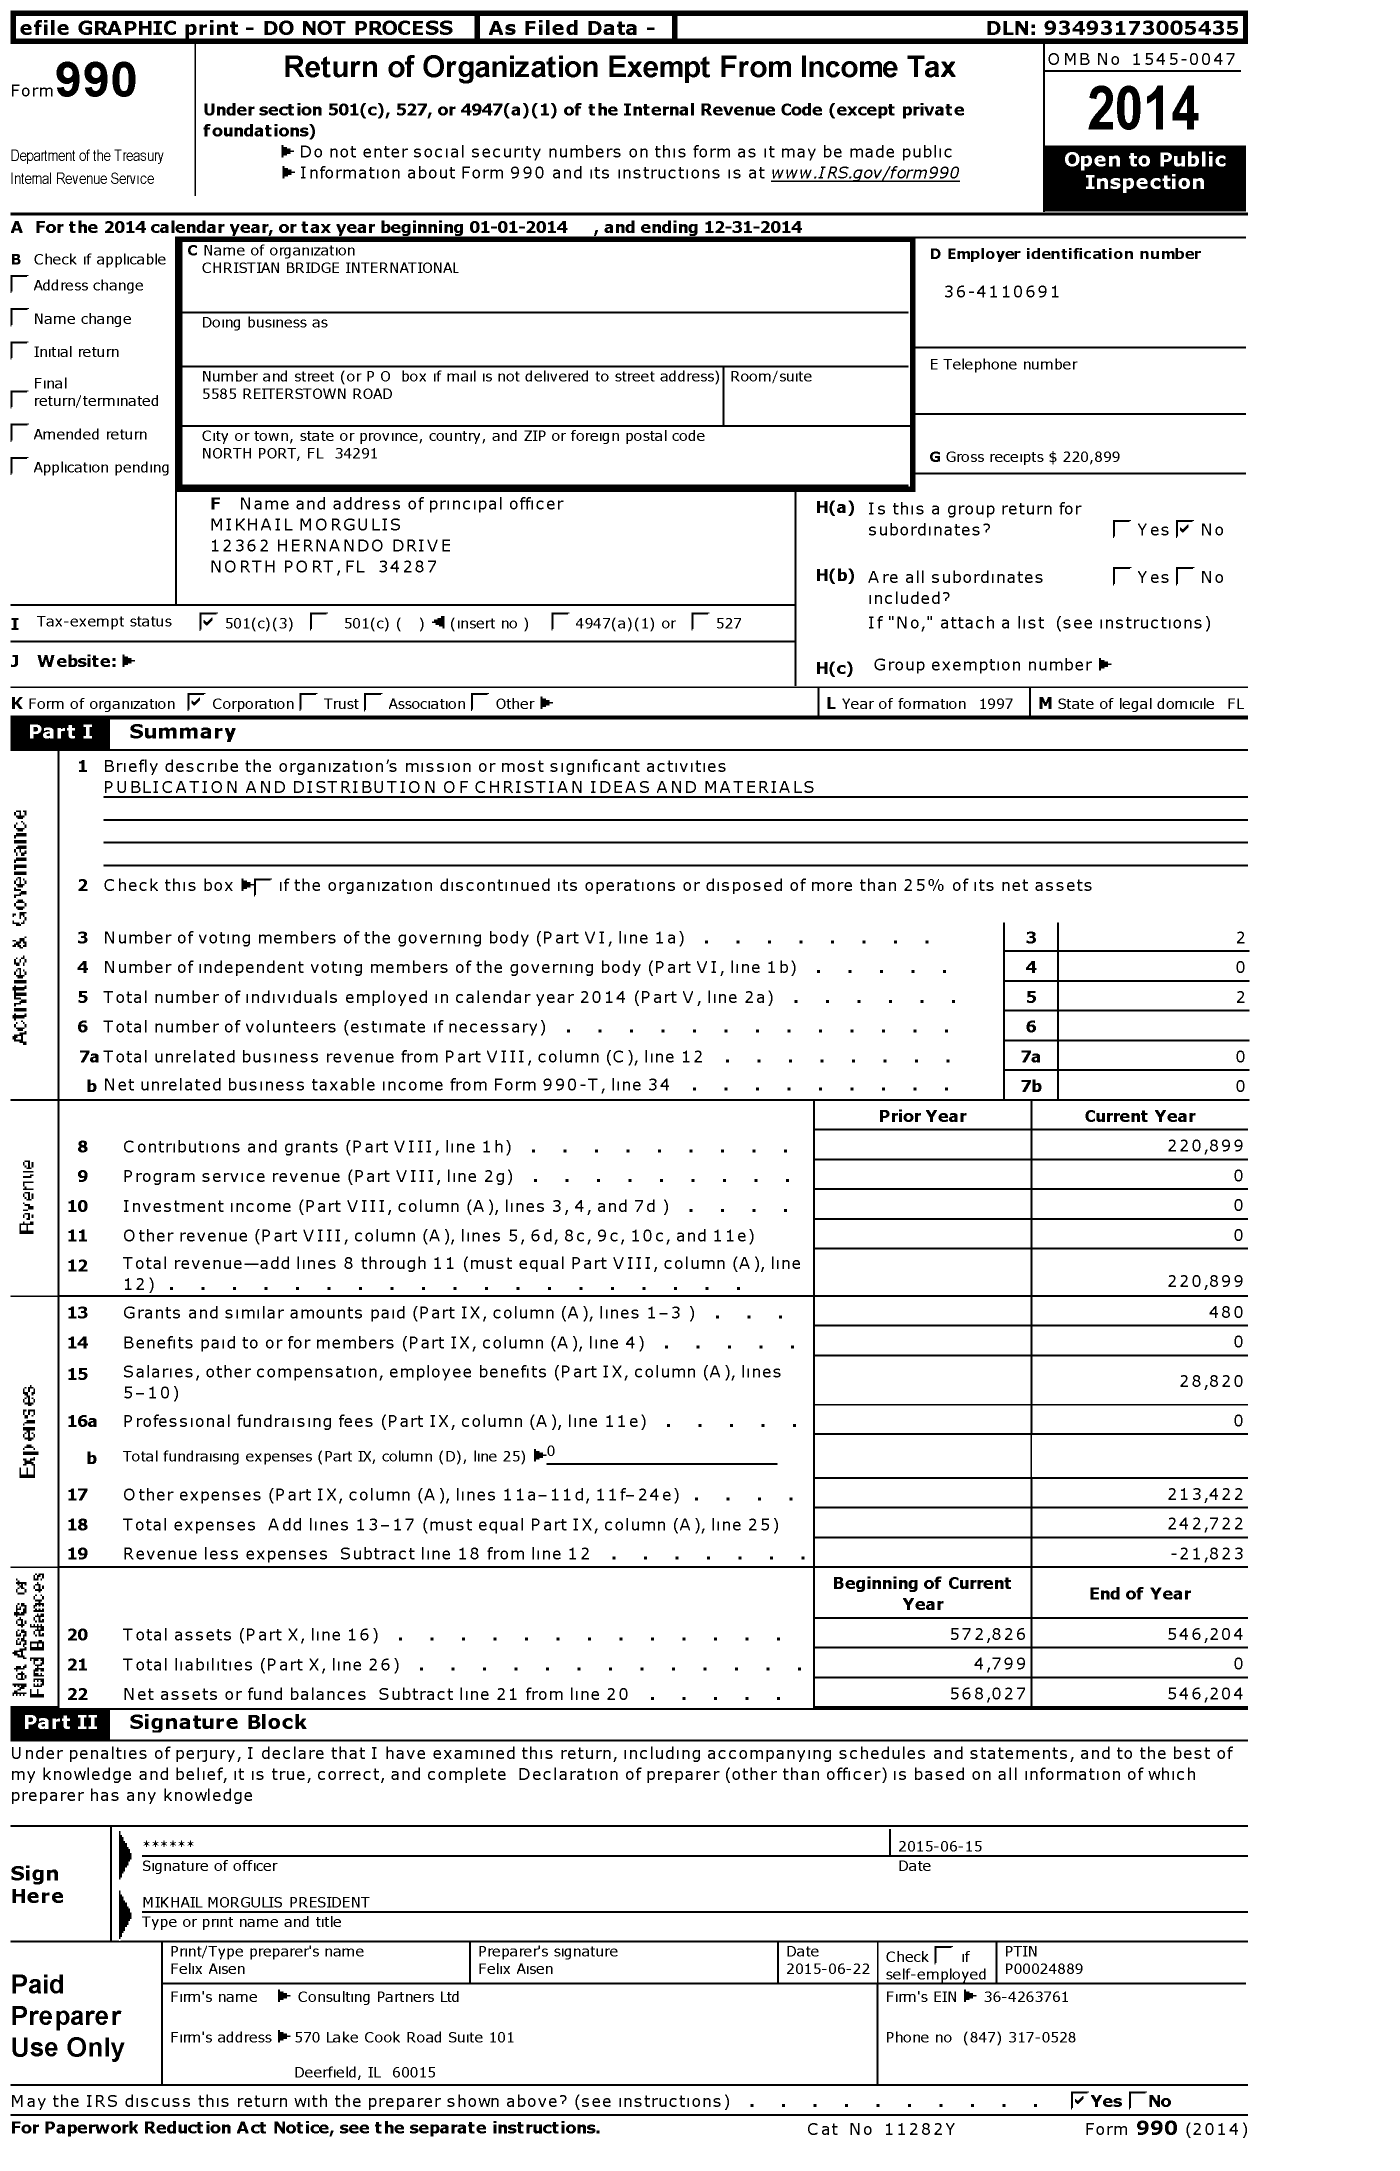 Image of first page of 2014 Form 990 for Christian Bridge International